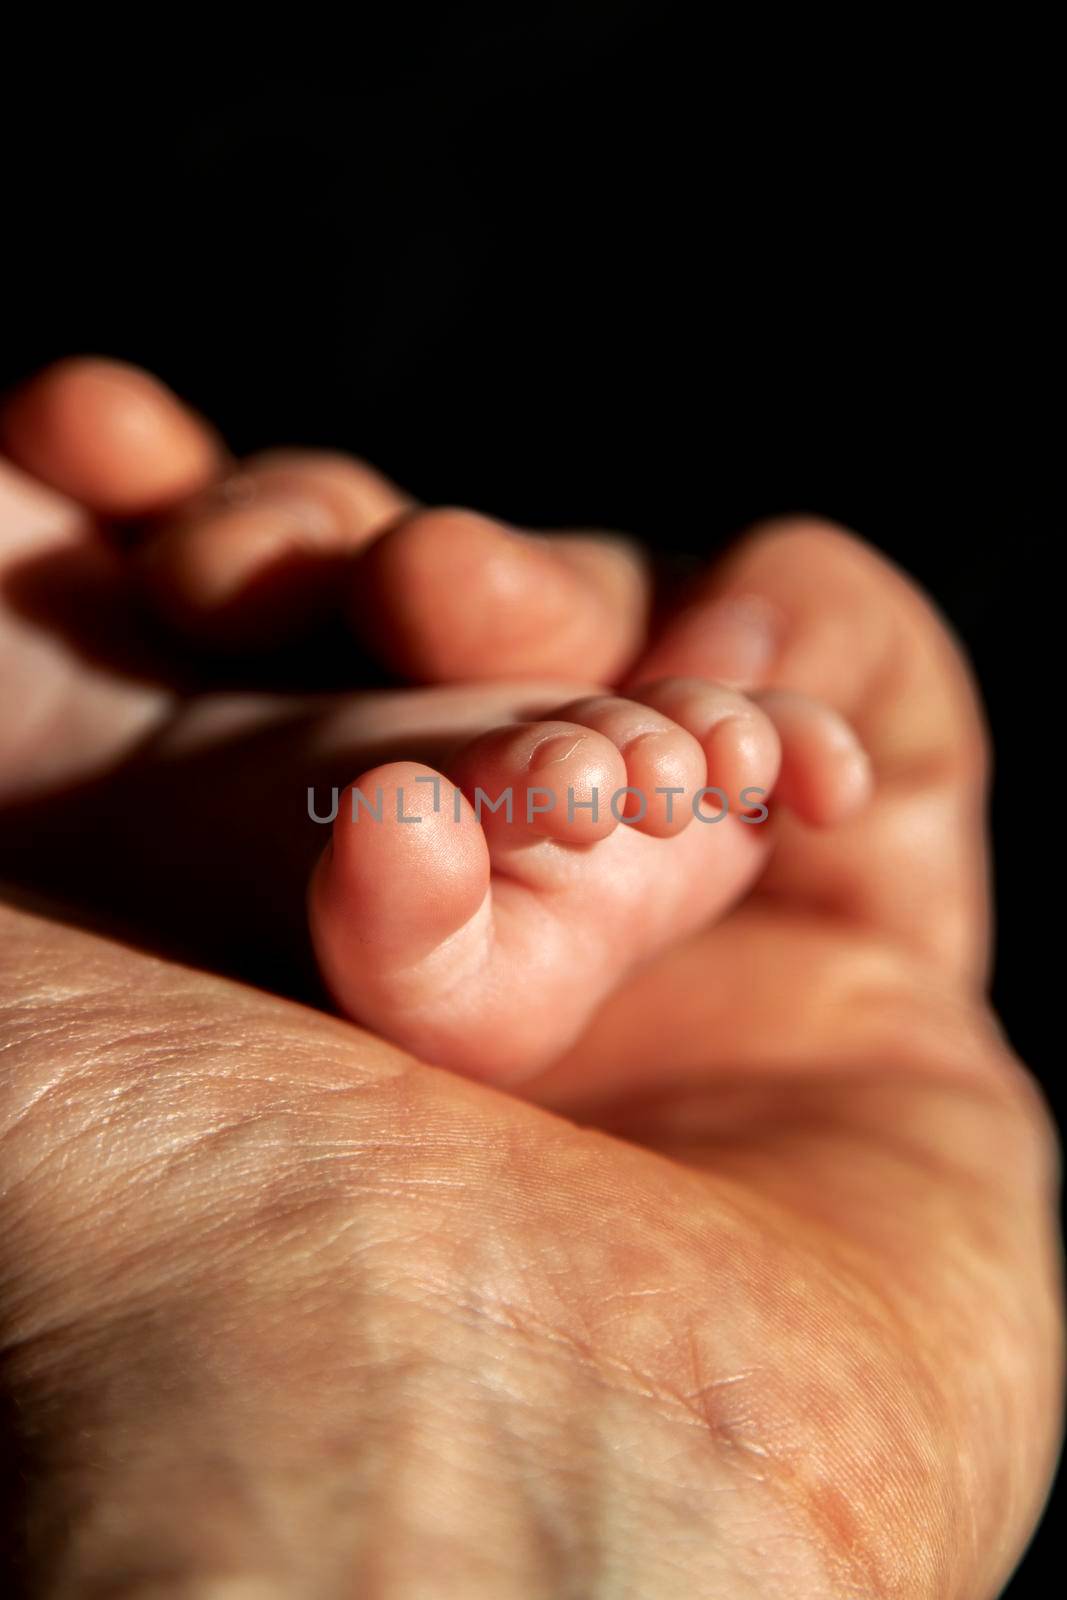 A baby foot softly hold by a man hand